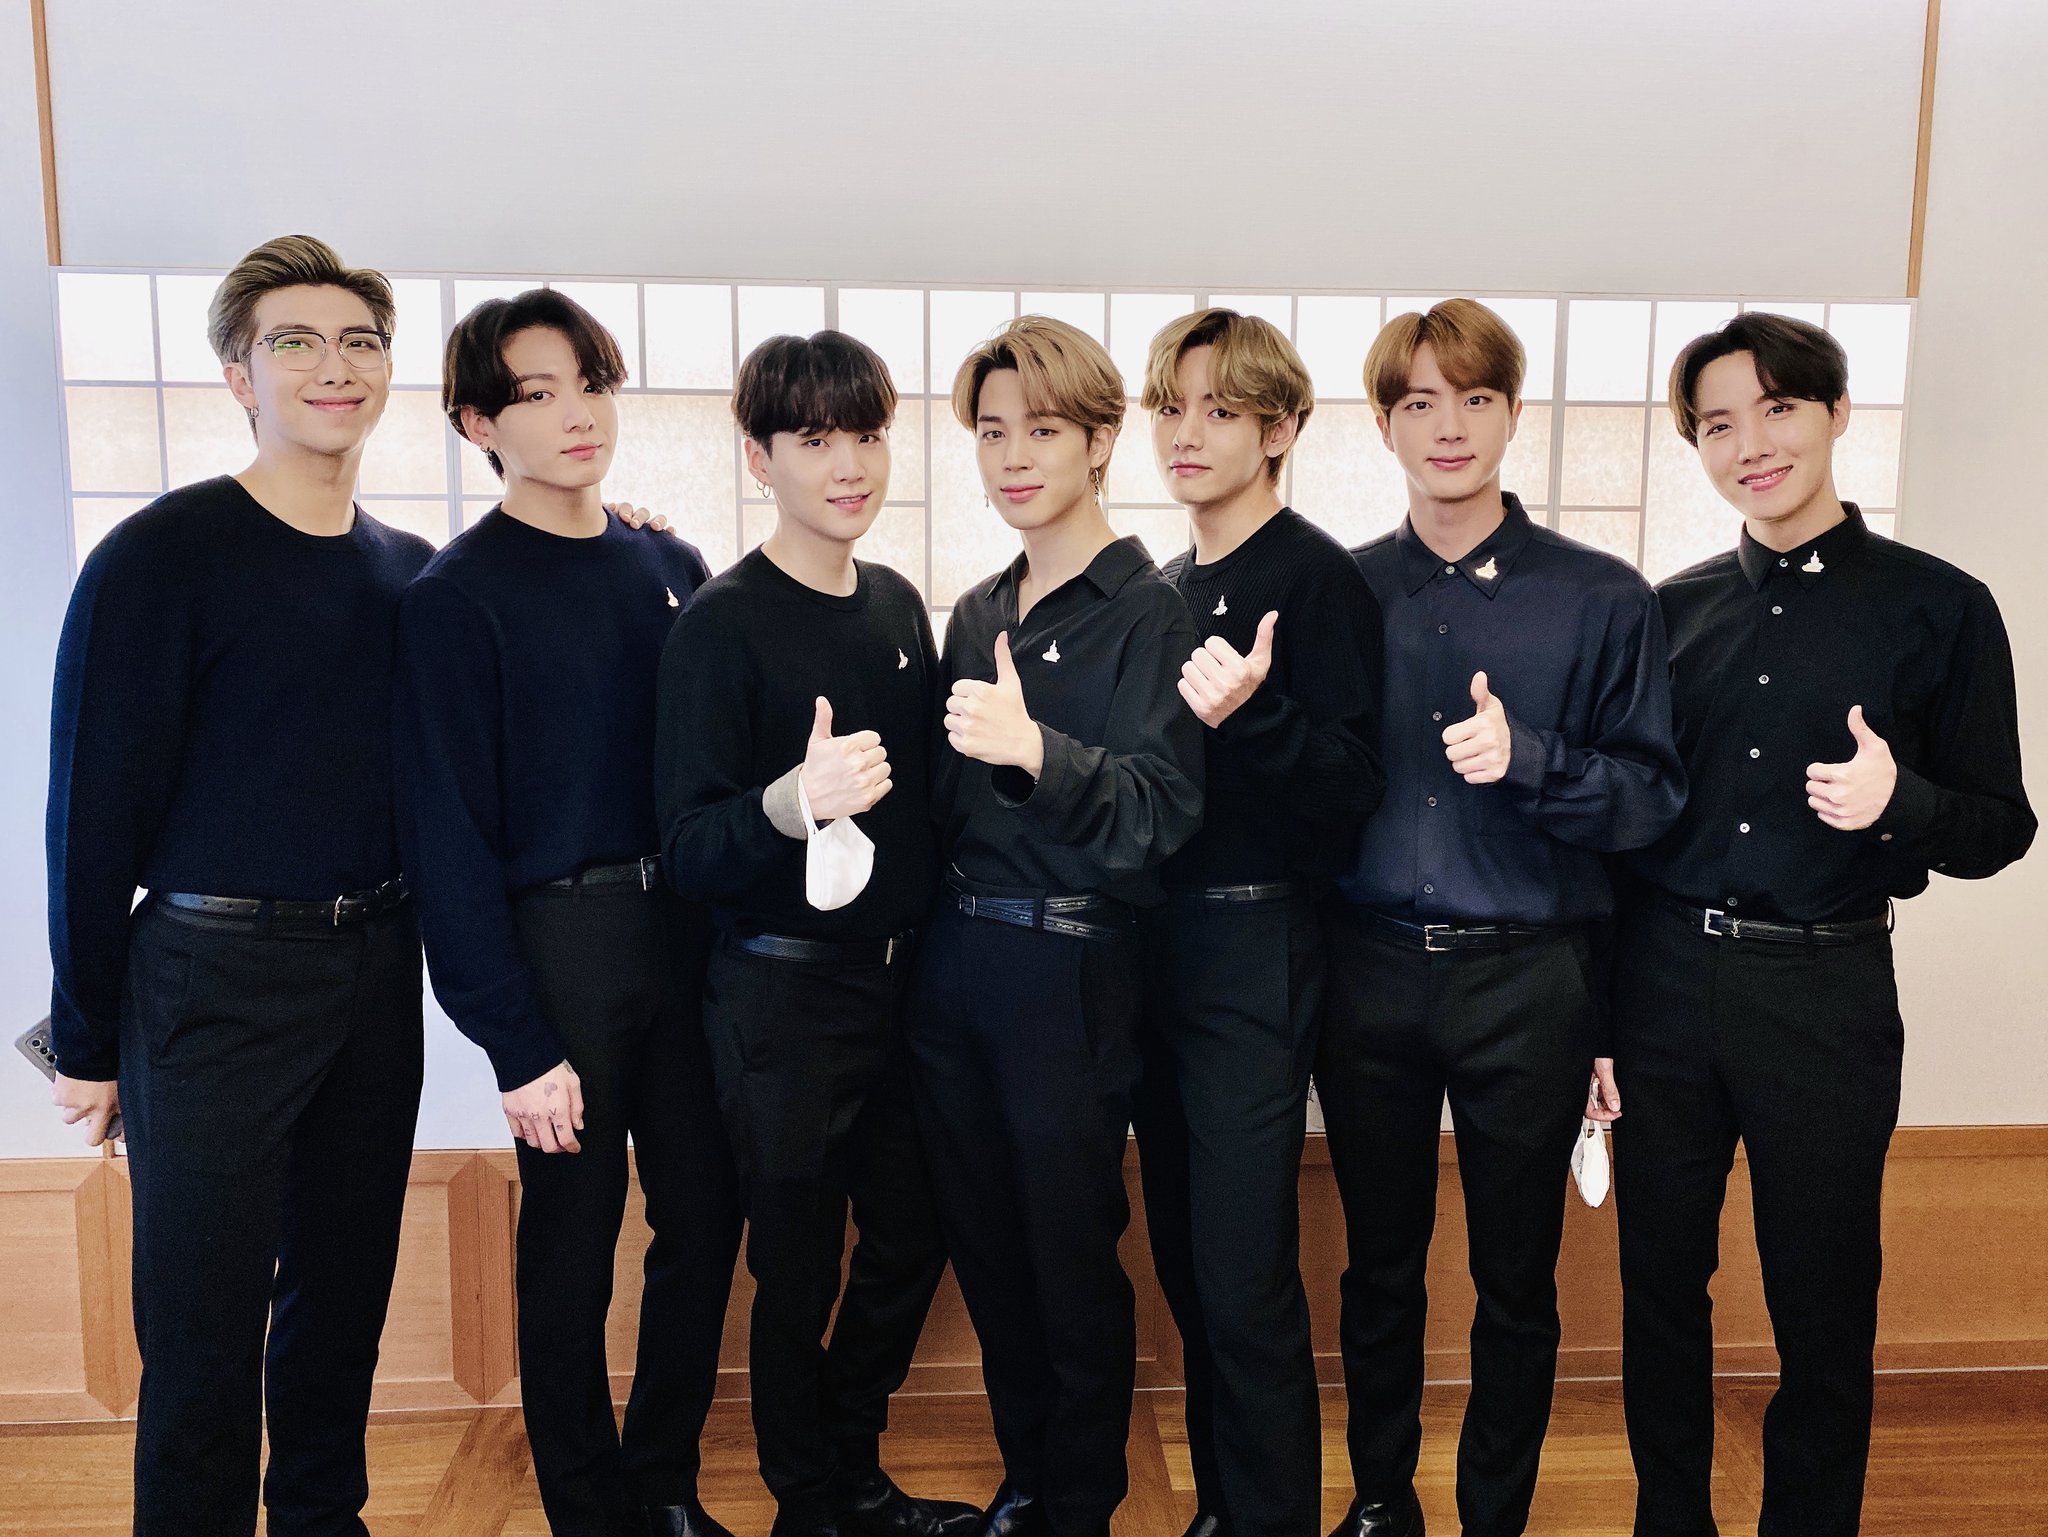 bts-to-give-message-of-hope-at-75th-united-nations-general-assembly-on-september-23-2